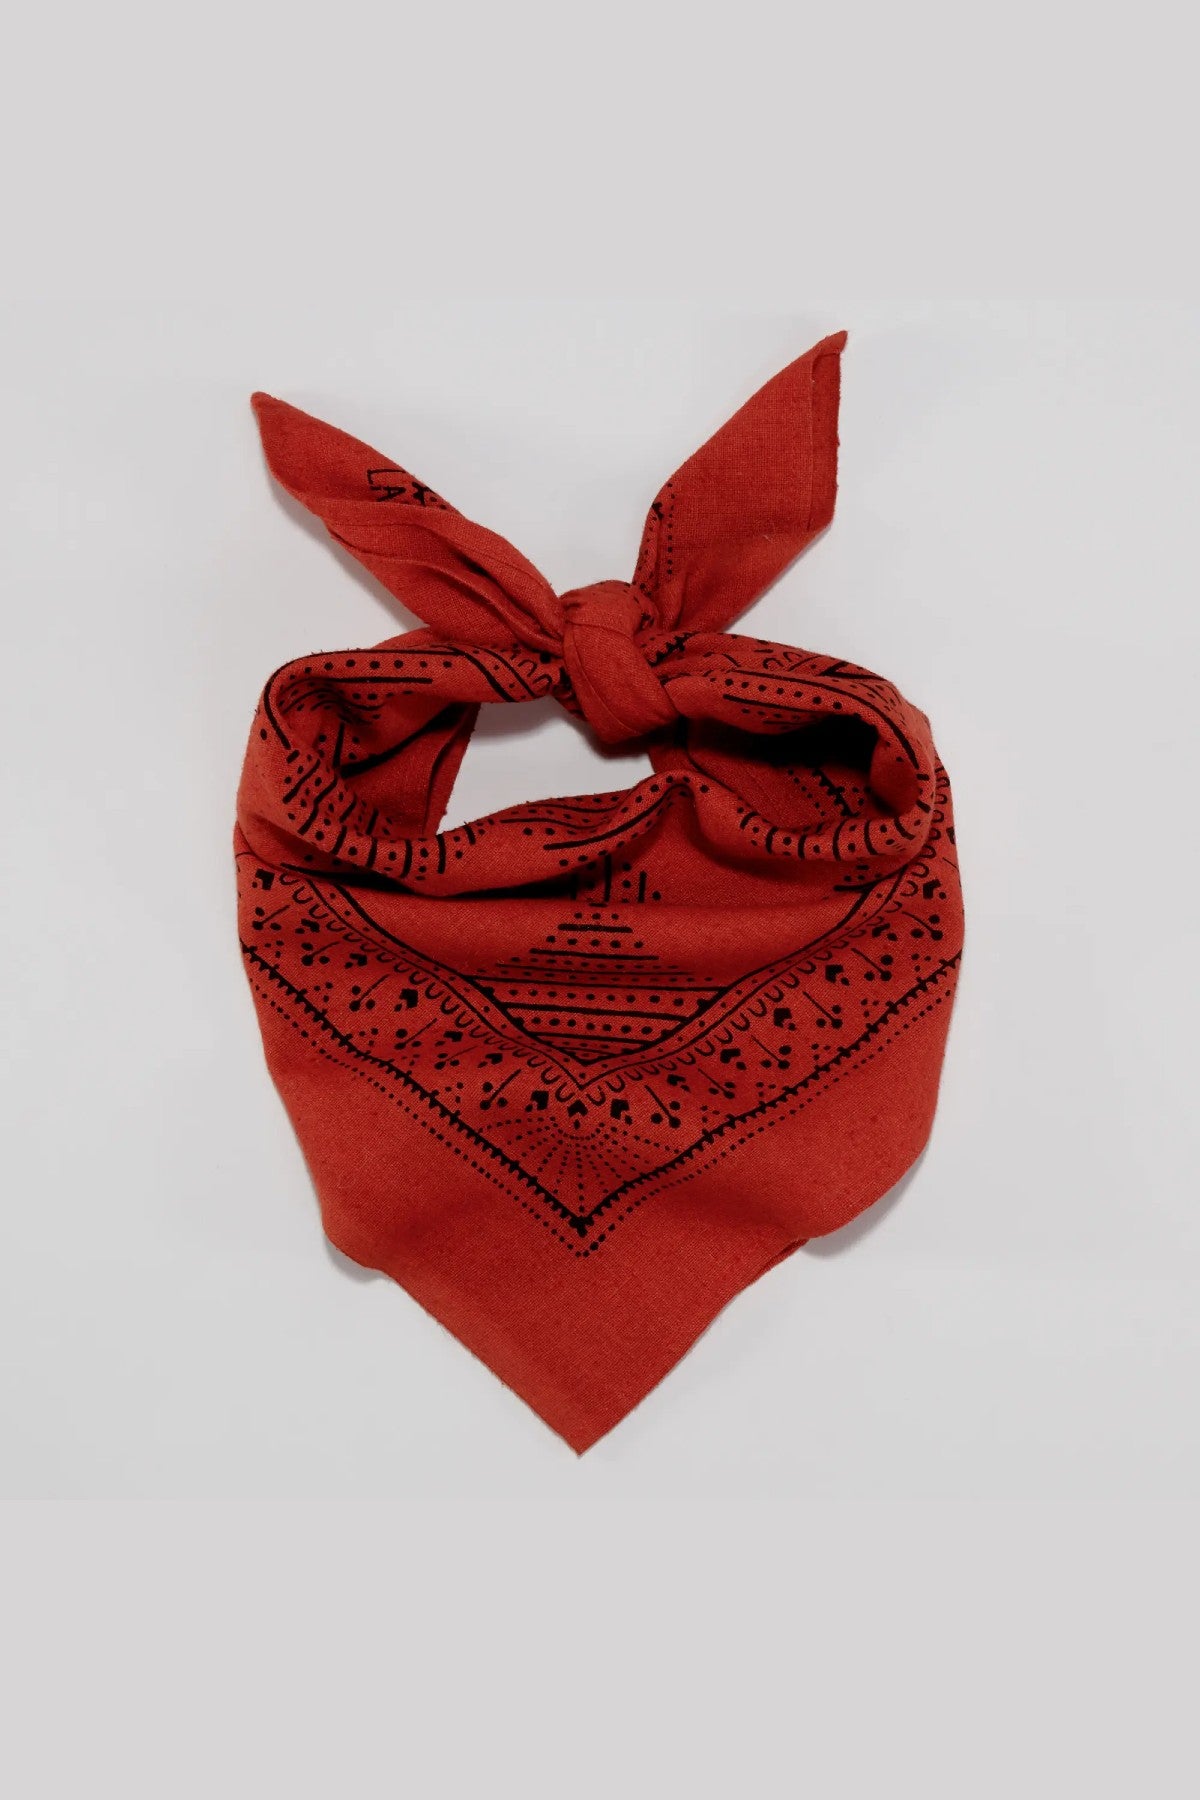 LAST CHANCE TEXTILES Naturally Dyed Raw Silk Bandana in Madder Red with Classic Black Check Print